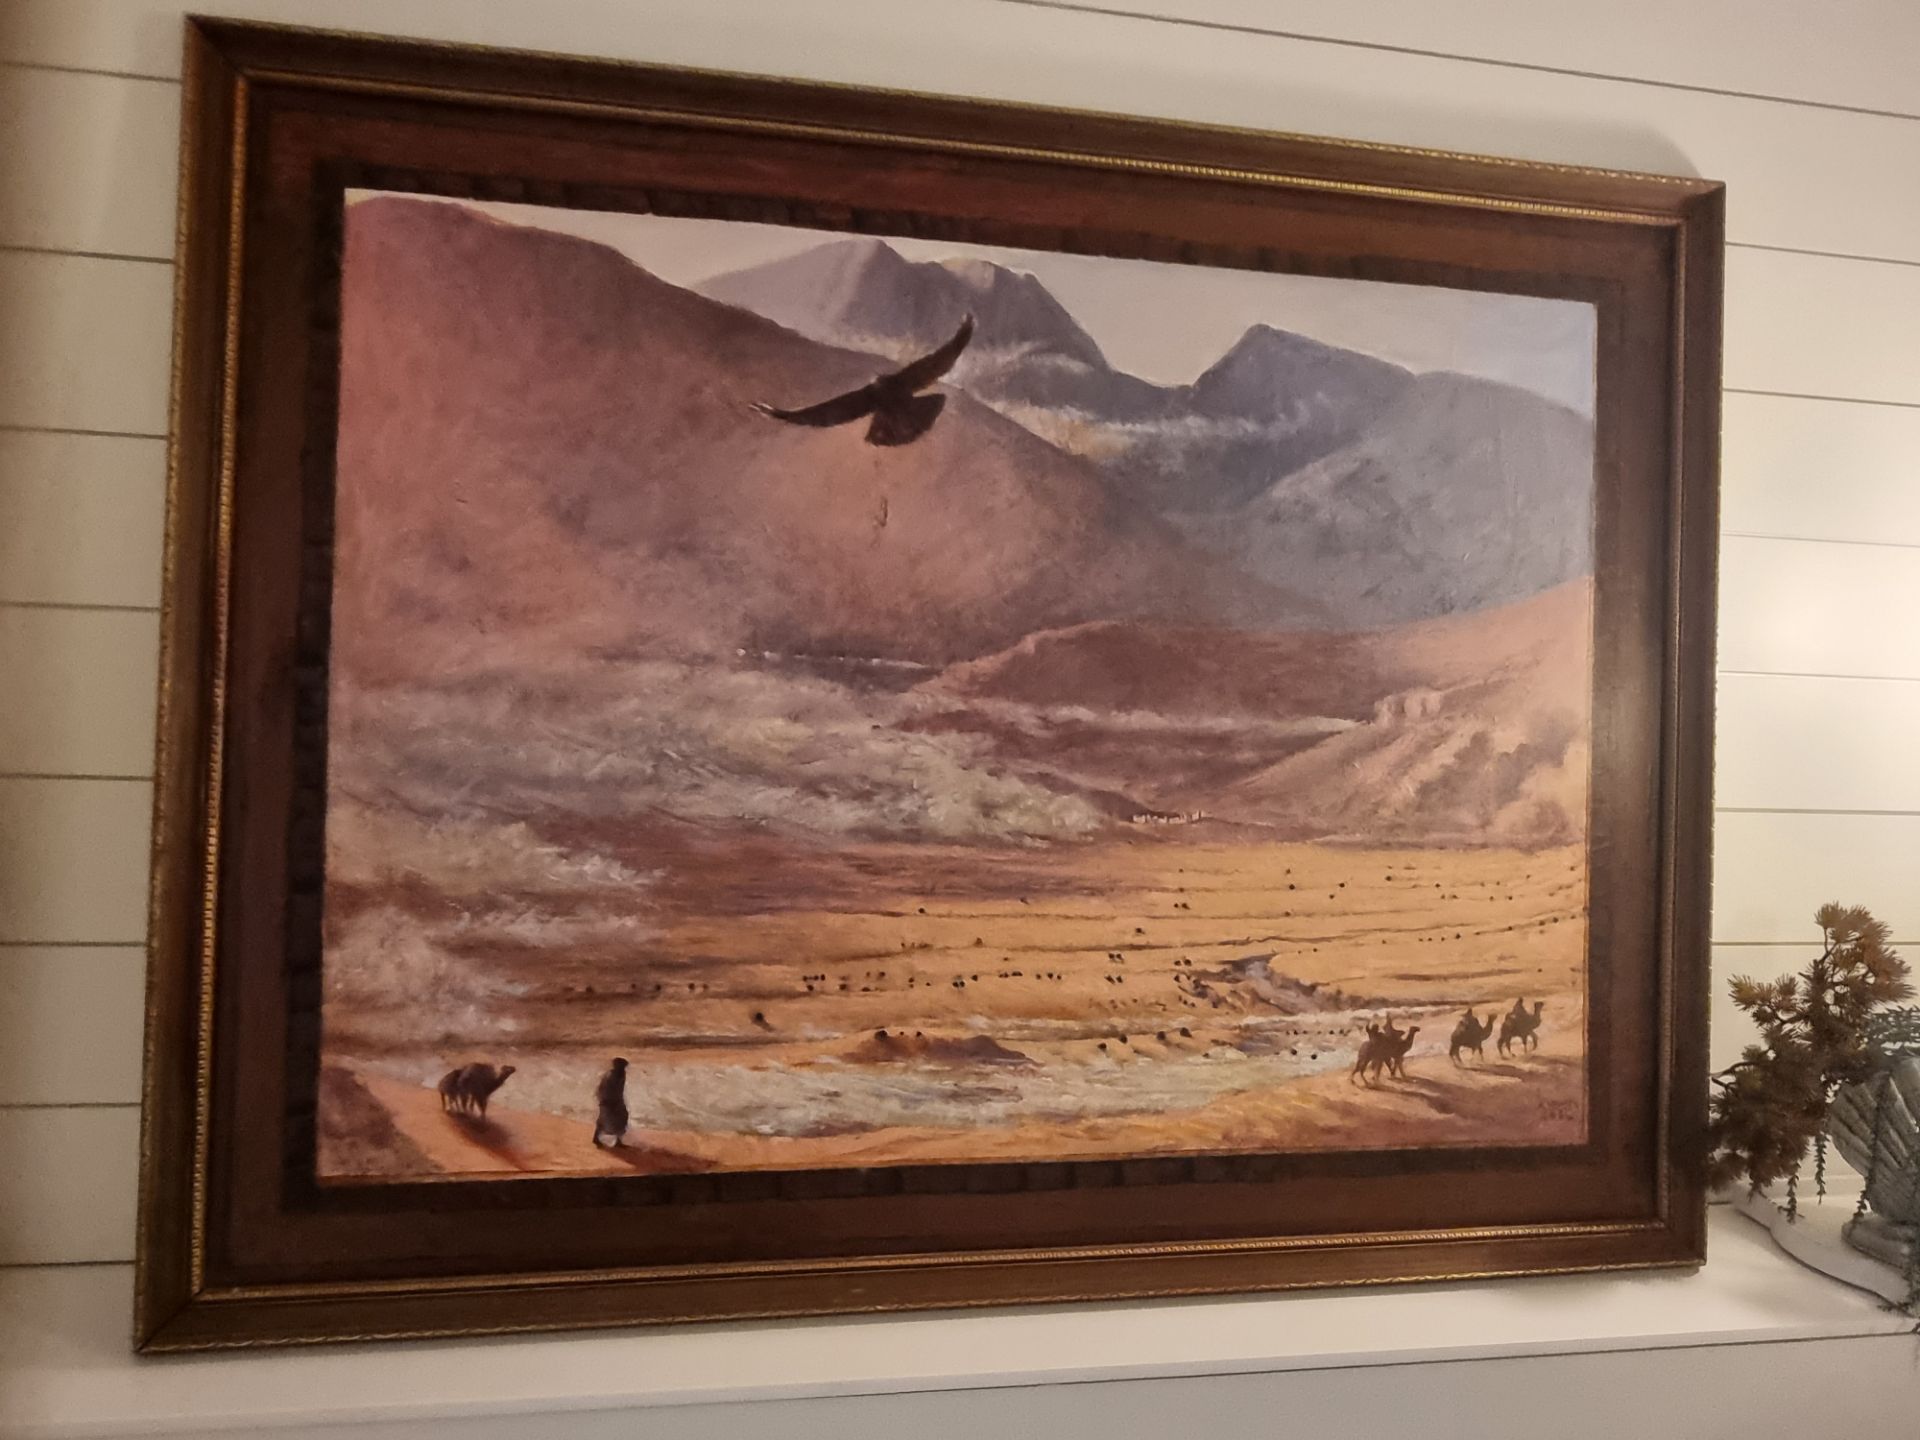 Framed Art Alan Healey (British) An interesting large vintage painting signed by Alan Healey and - Image 2 of 4